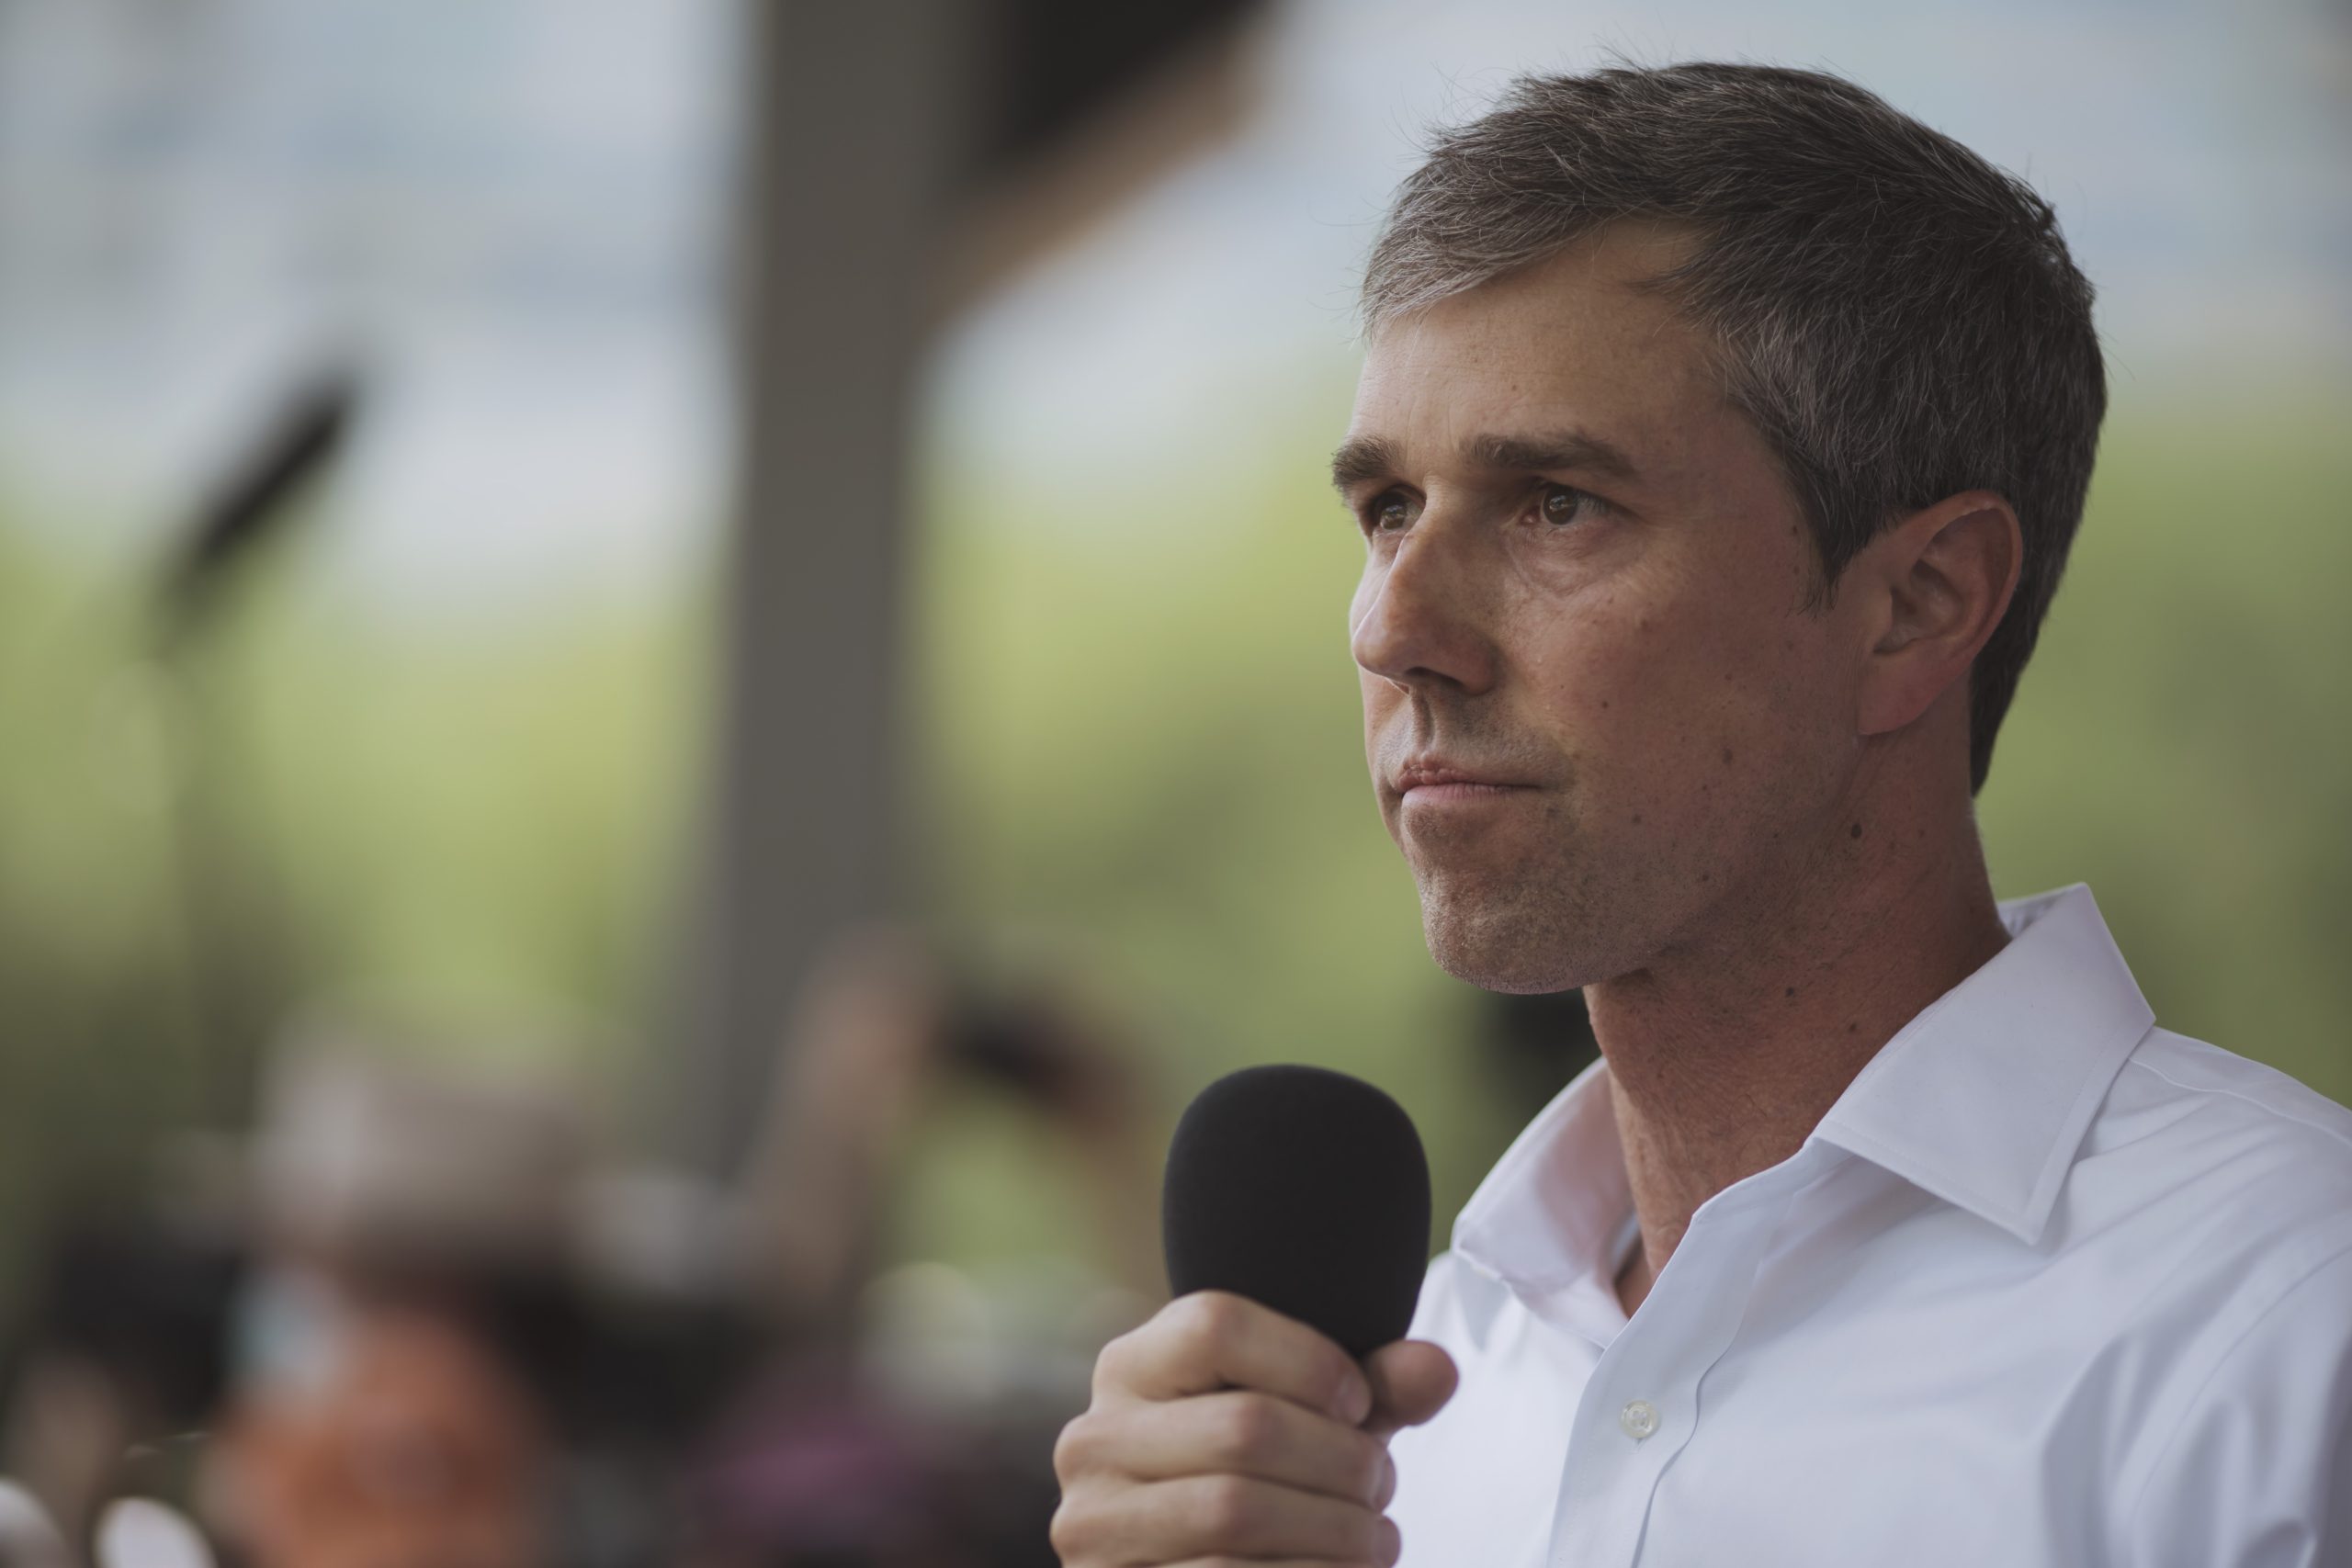 Beto O’Rourke postpones events after being hospitalized